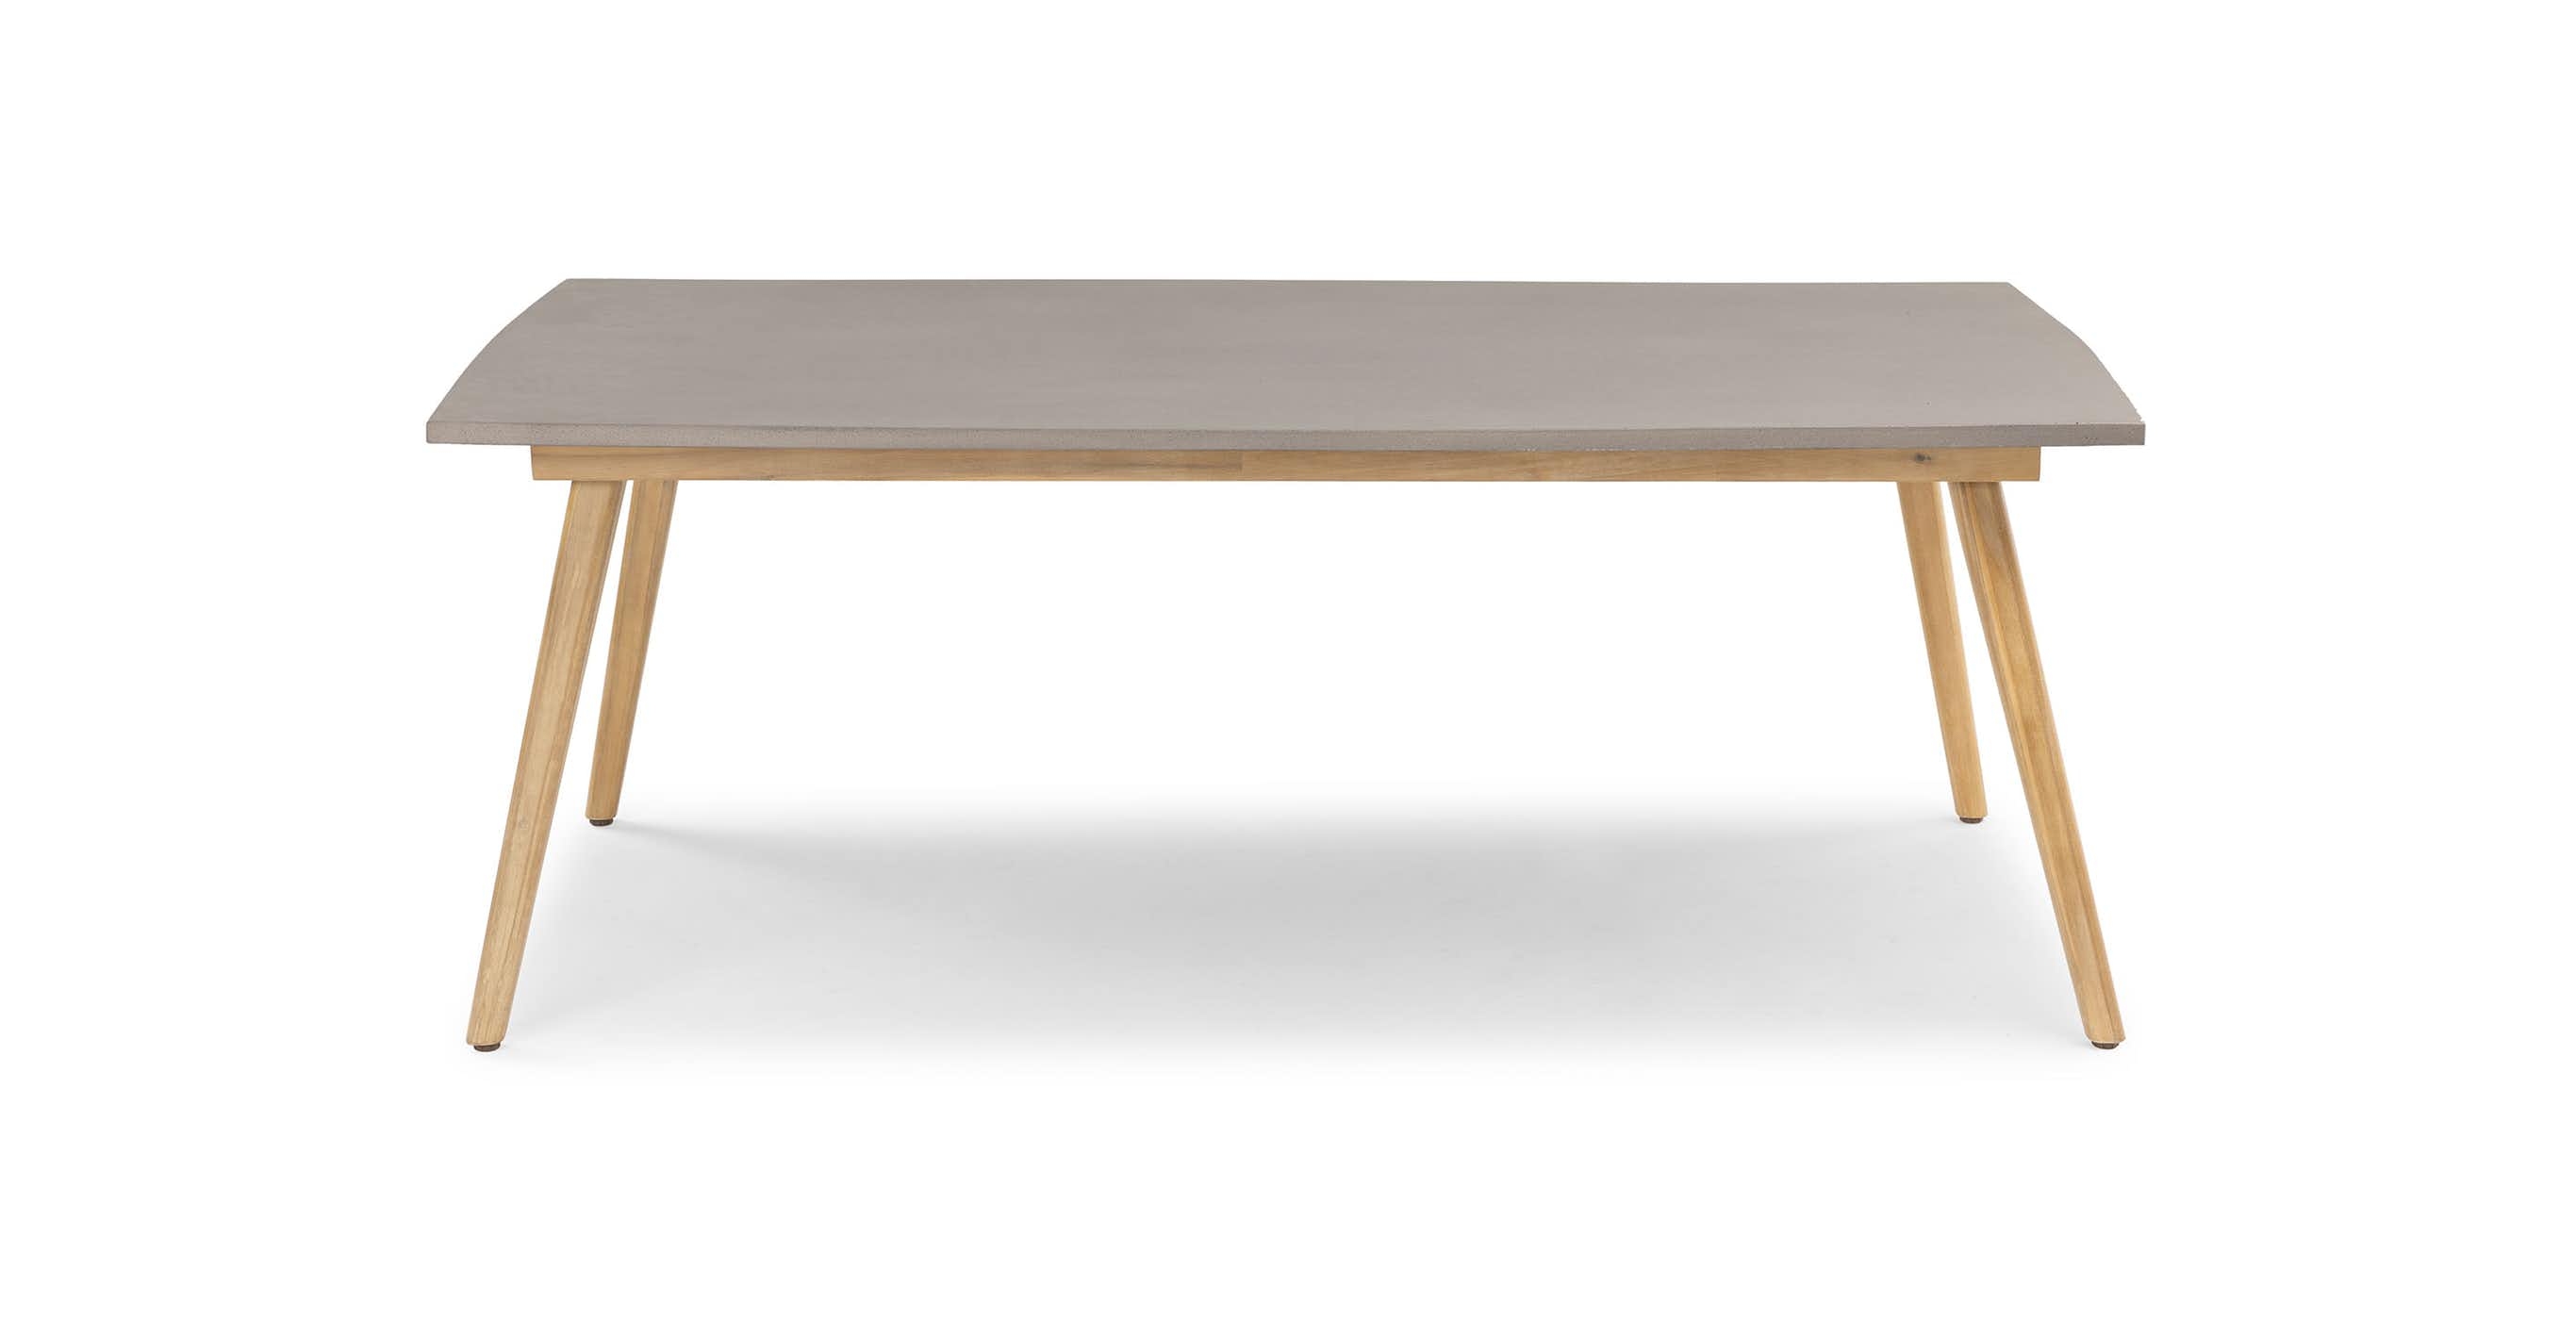 Atra Concrete Dining Table for 6 - Image 2